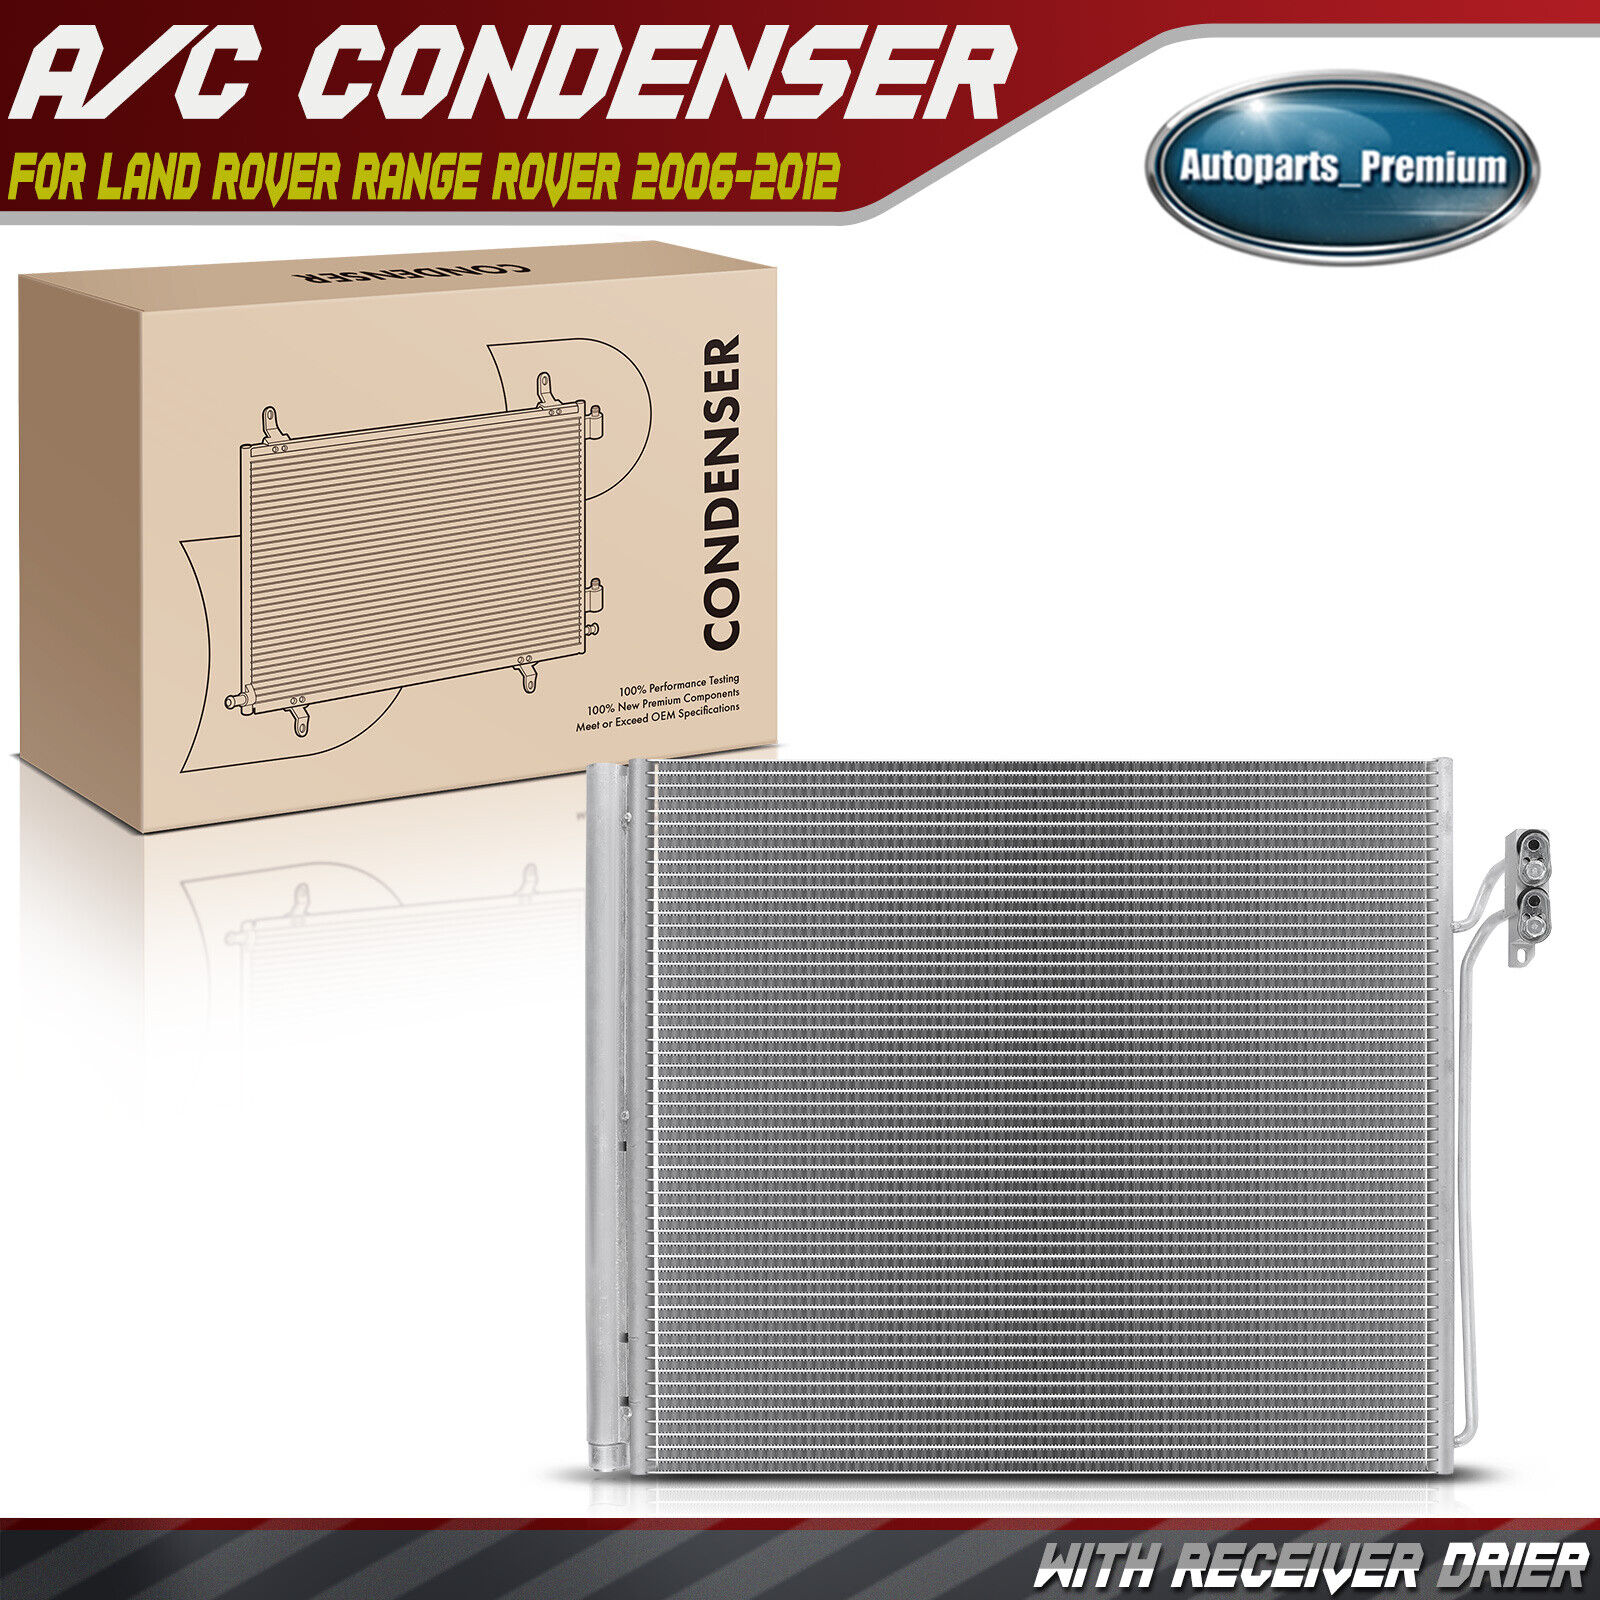 New A/C Air Conditioning Condenser w/ Receiver Drier for Land Rover Range Rover